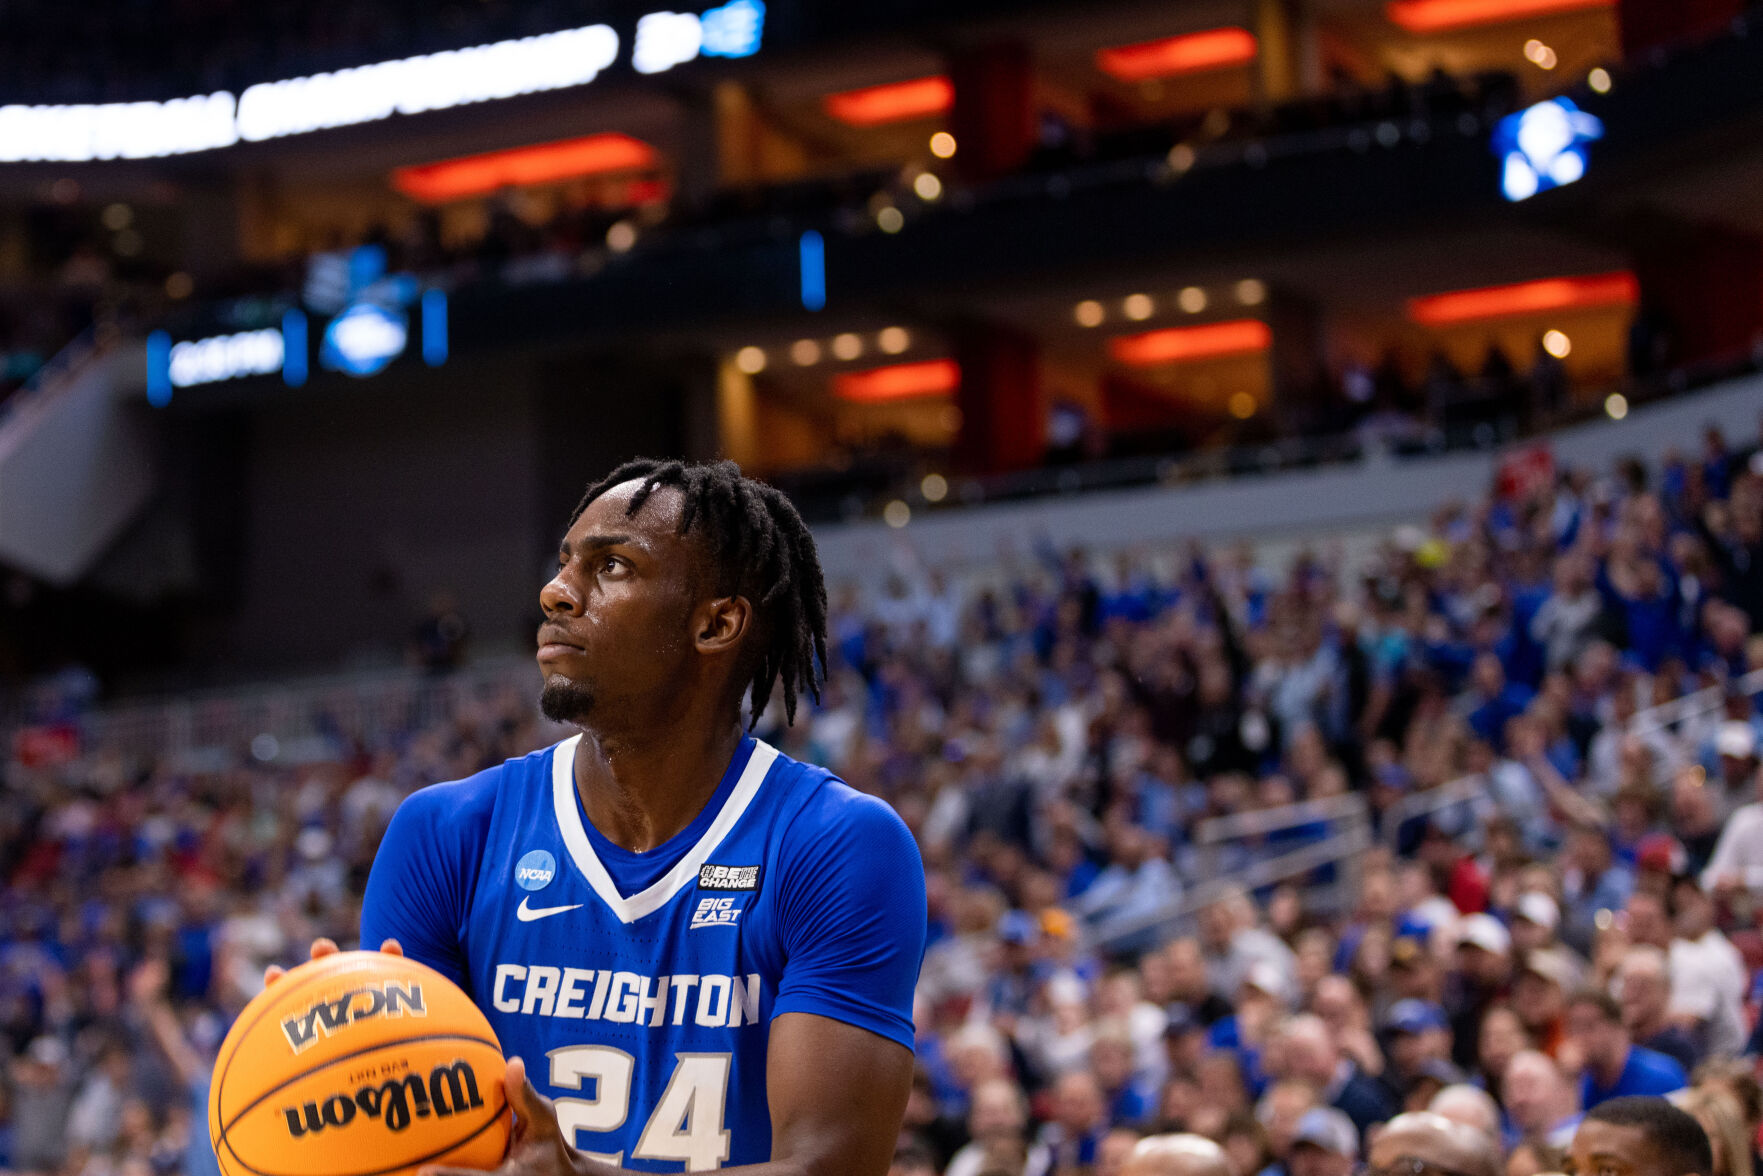 Whats next for Creighton mens basketball? A lot of offseason decisions